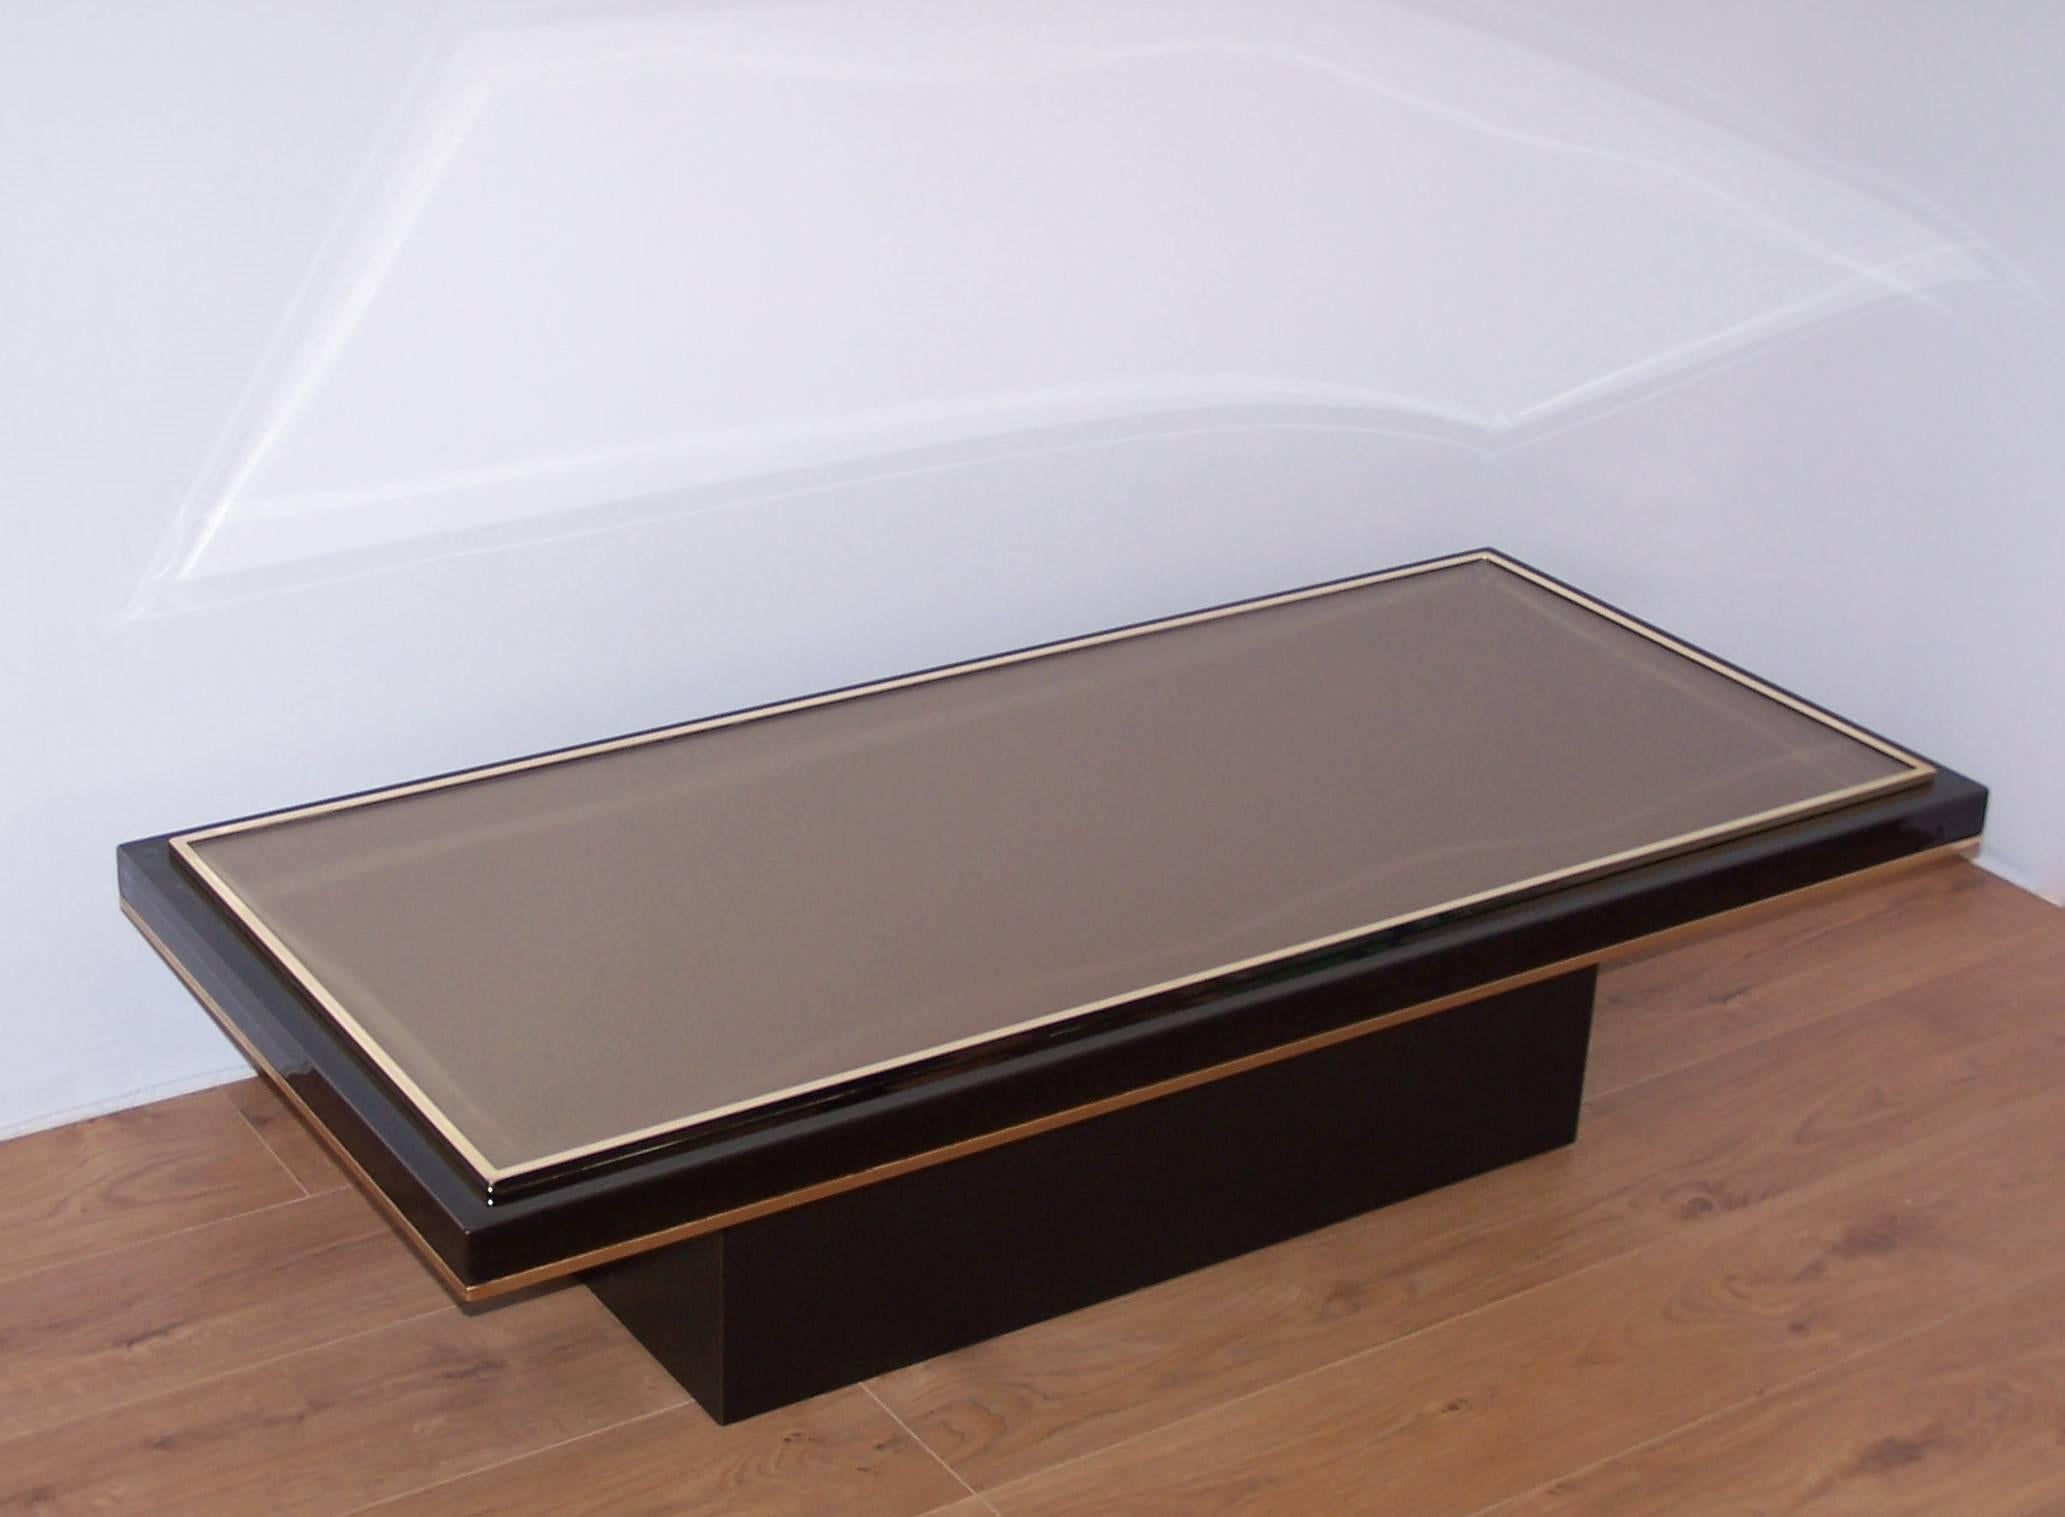 20th Century Dutch Design and Gold Coffee Table with Fine Gold 23-Carat by Roger Vanhevel